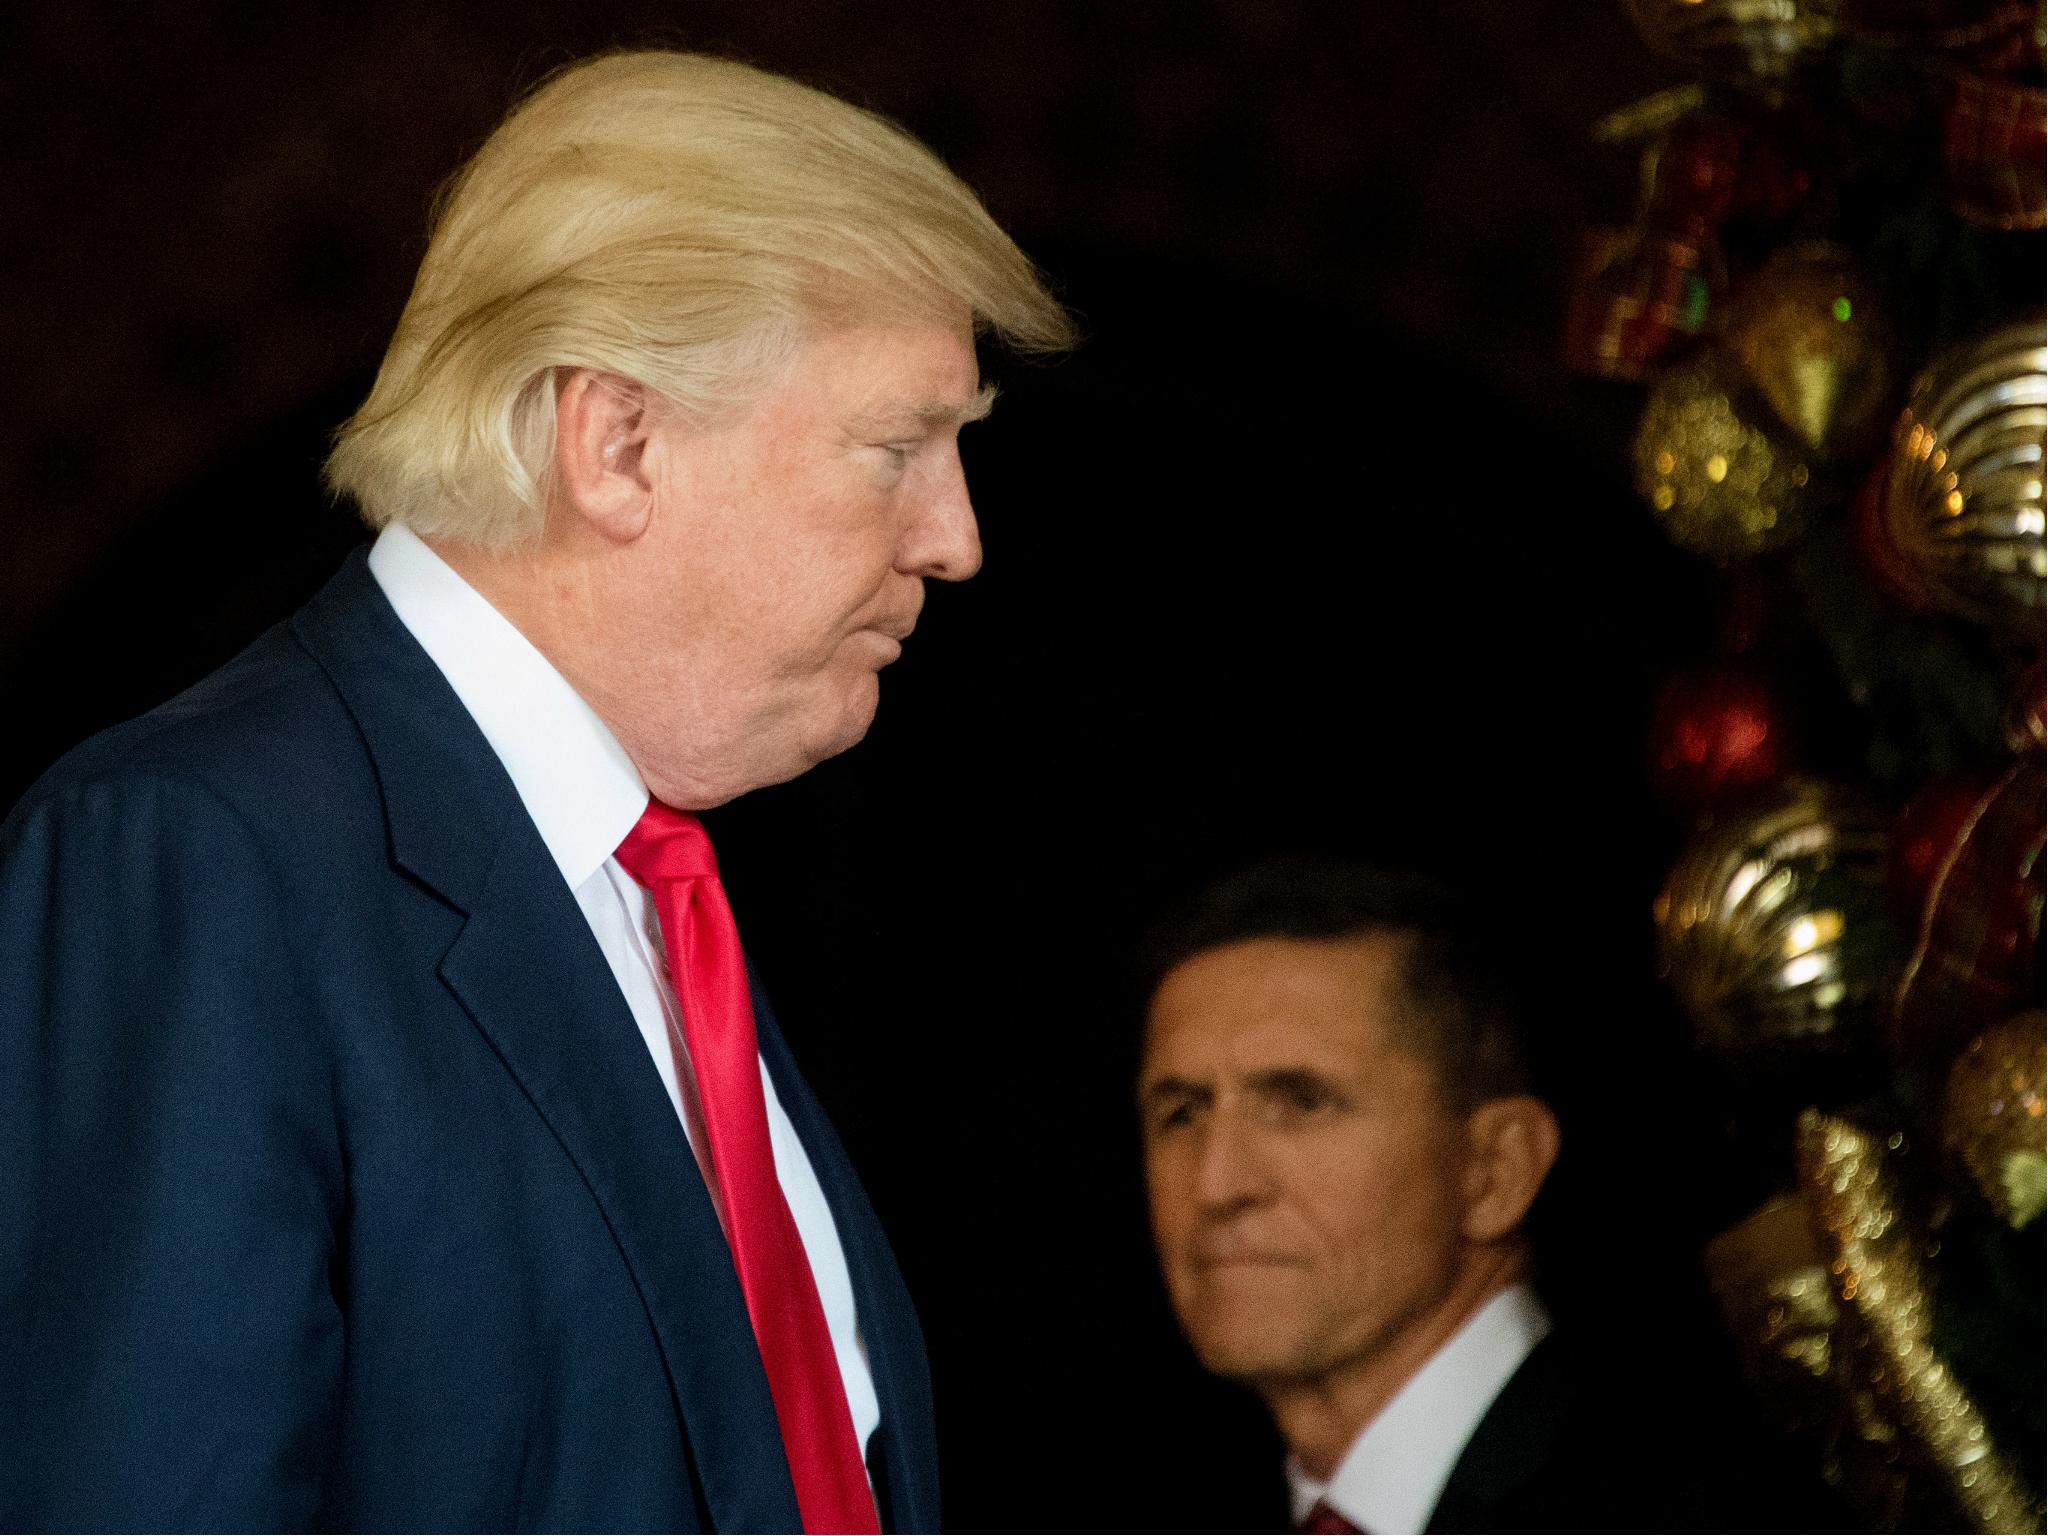 US Presiden Donald Trump stands with former National Security Adviser Michael Flynn at Mar-a-Lago in Palm Beach, Florida on 21 December 2016.